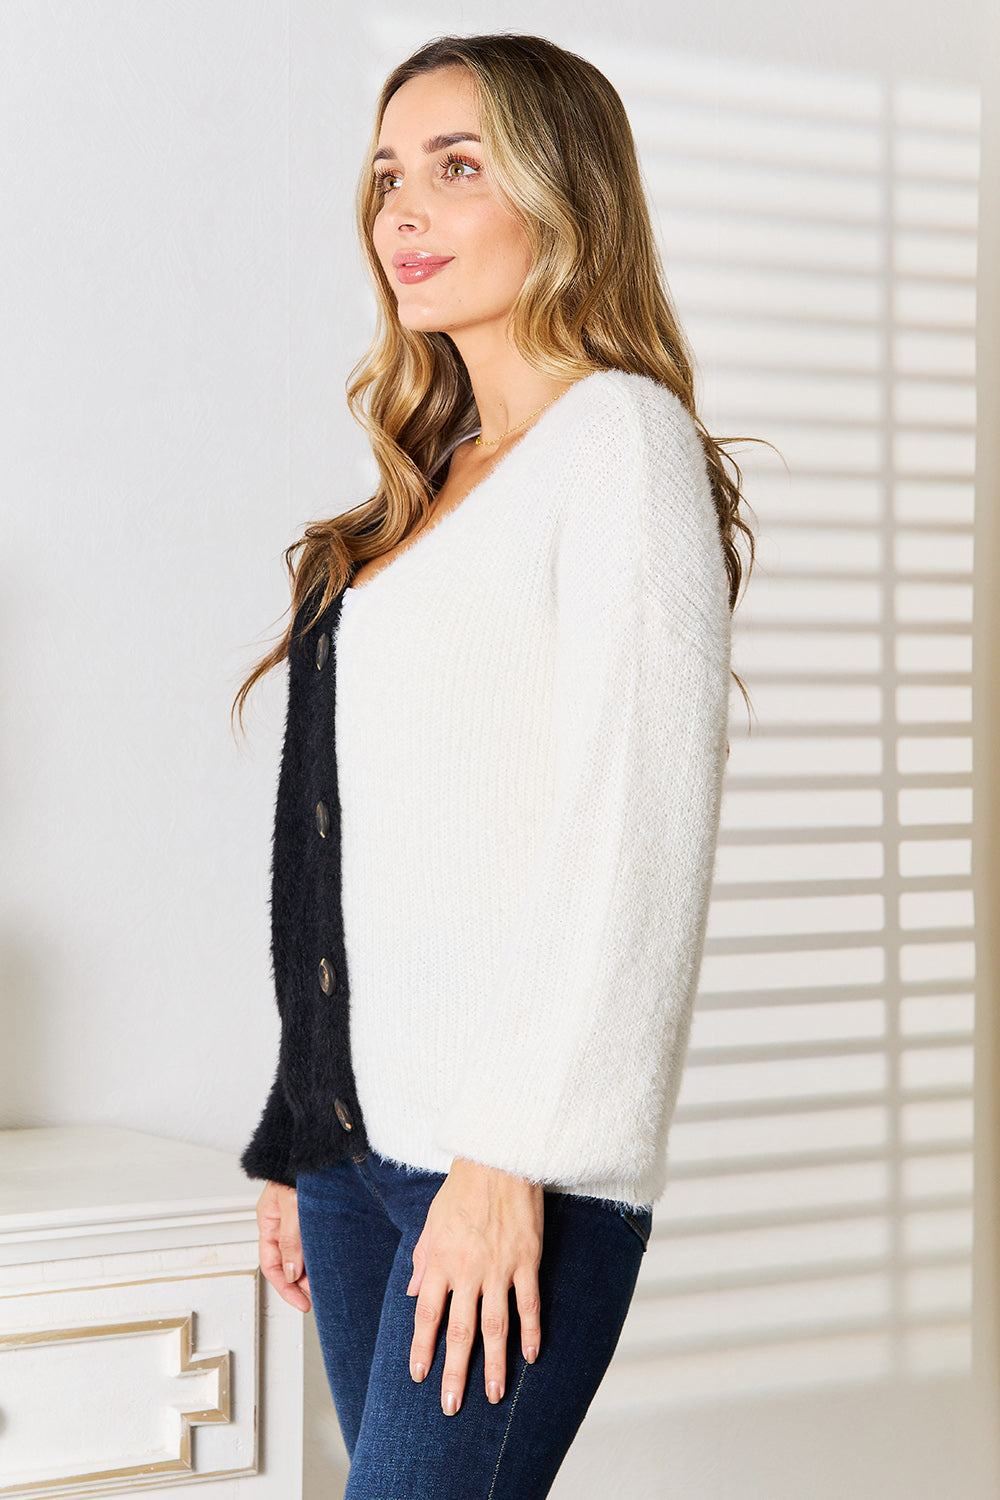 Black and White Color Block Cardigan - Inspired Eye Boutique